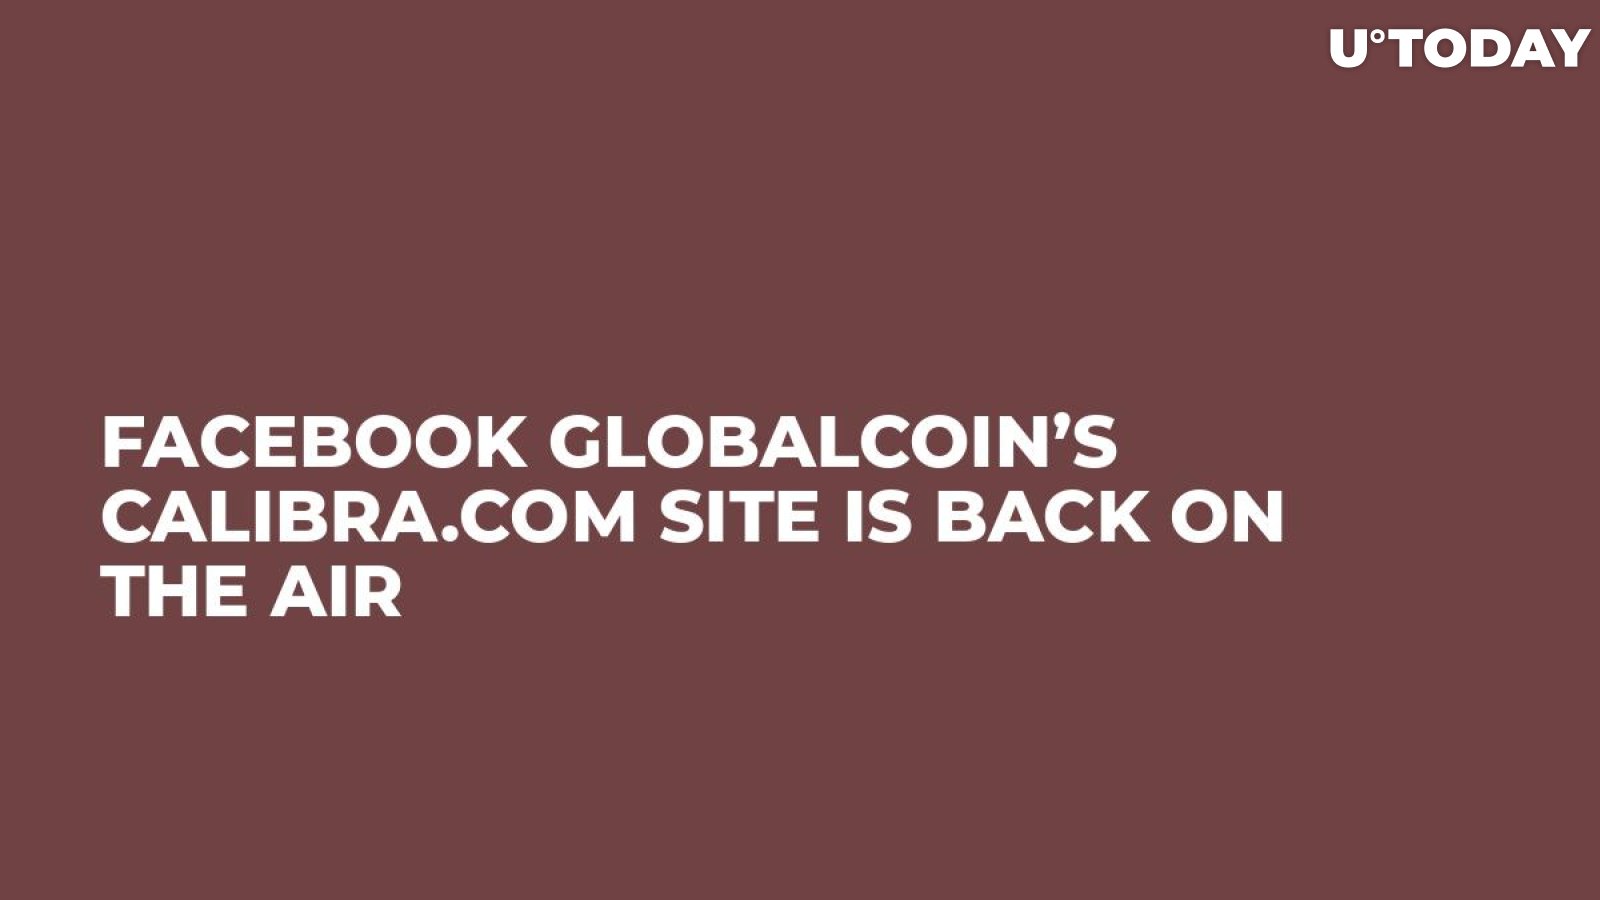 Facebook GlobalCoin’s Calibra.com Site is Back on the Air